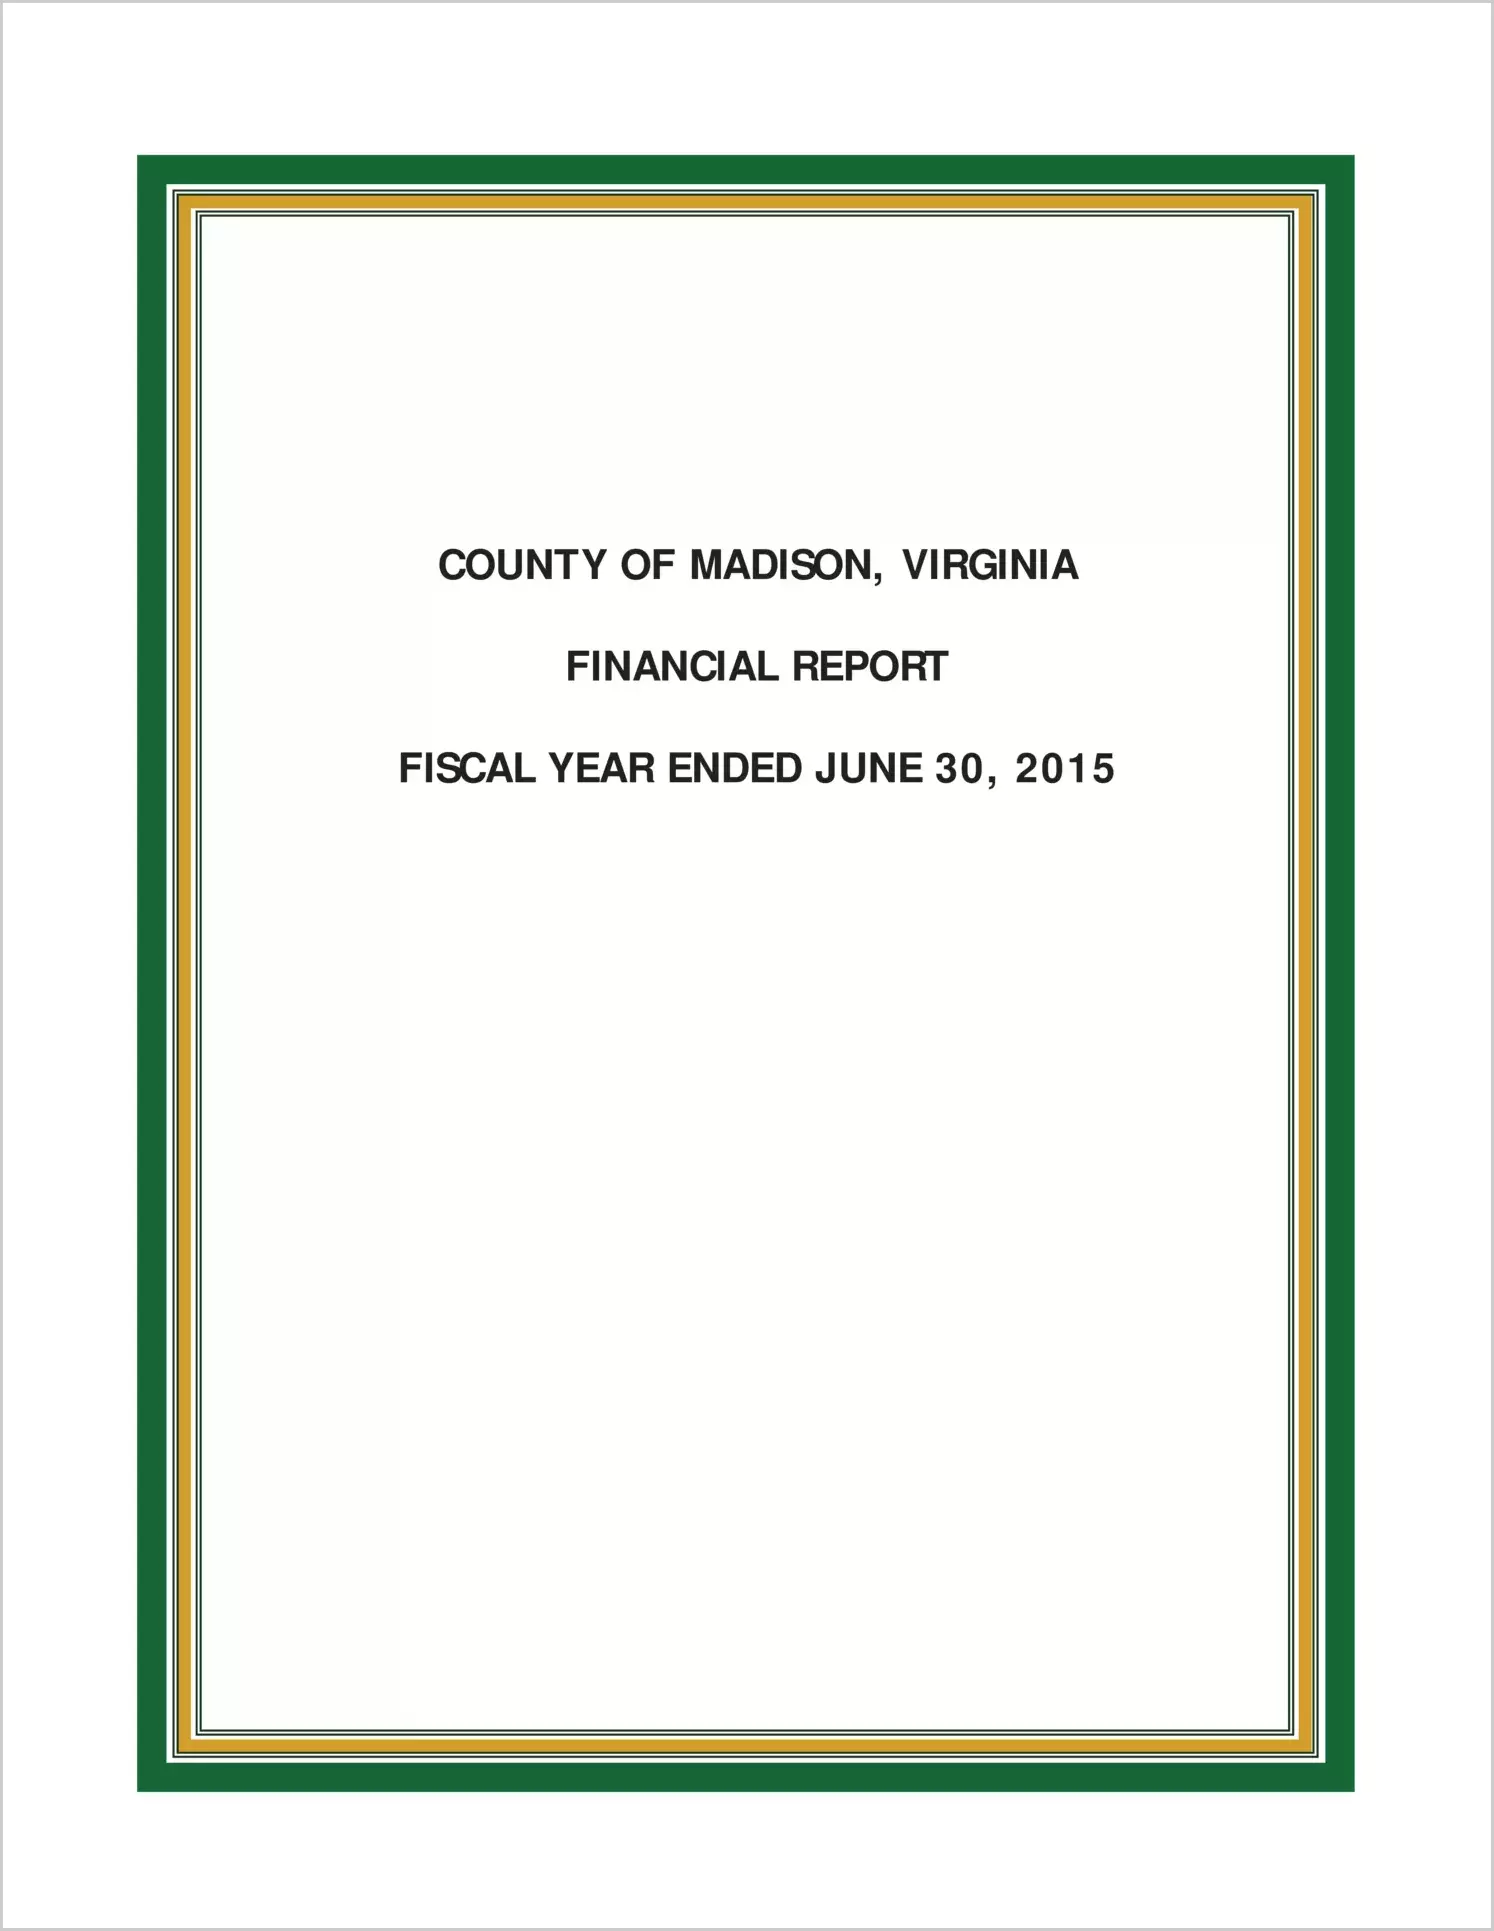 2015 Annual Financial Report for County of Madison